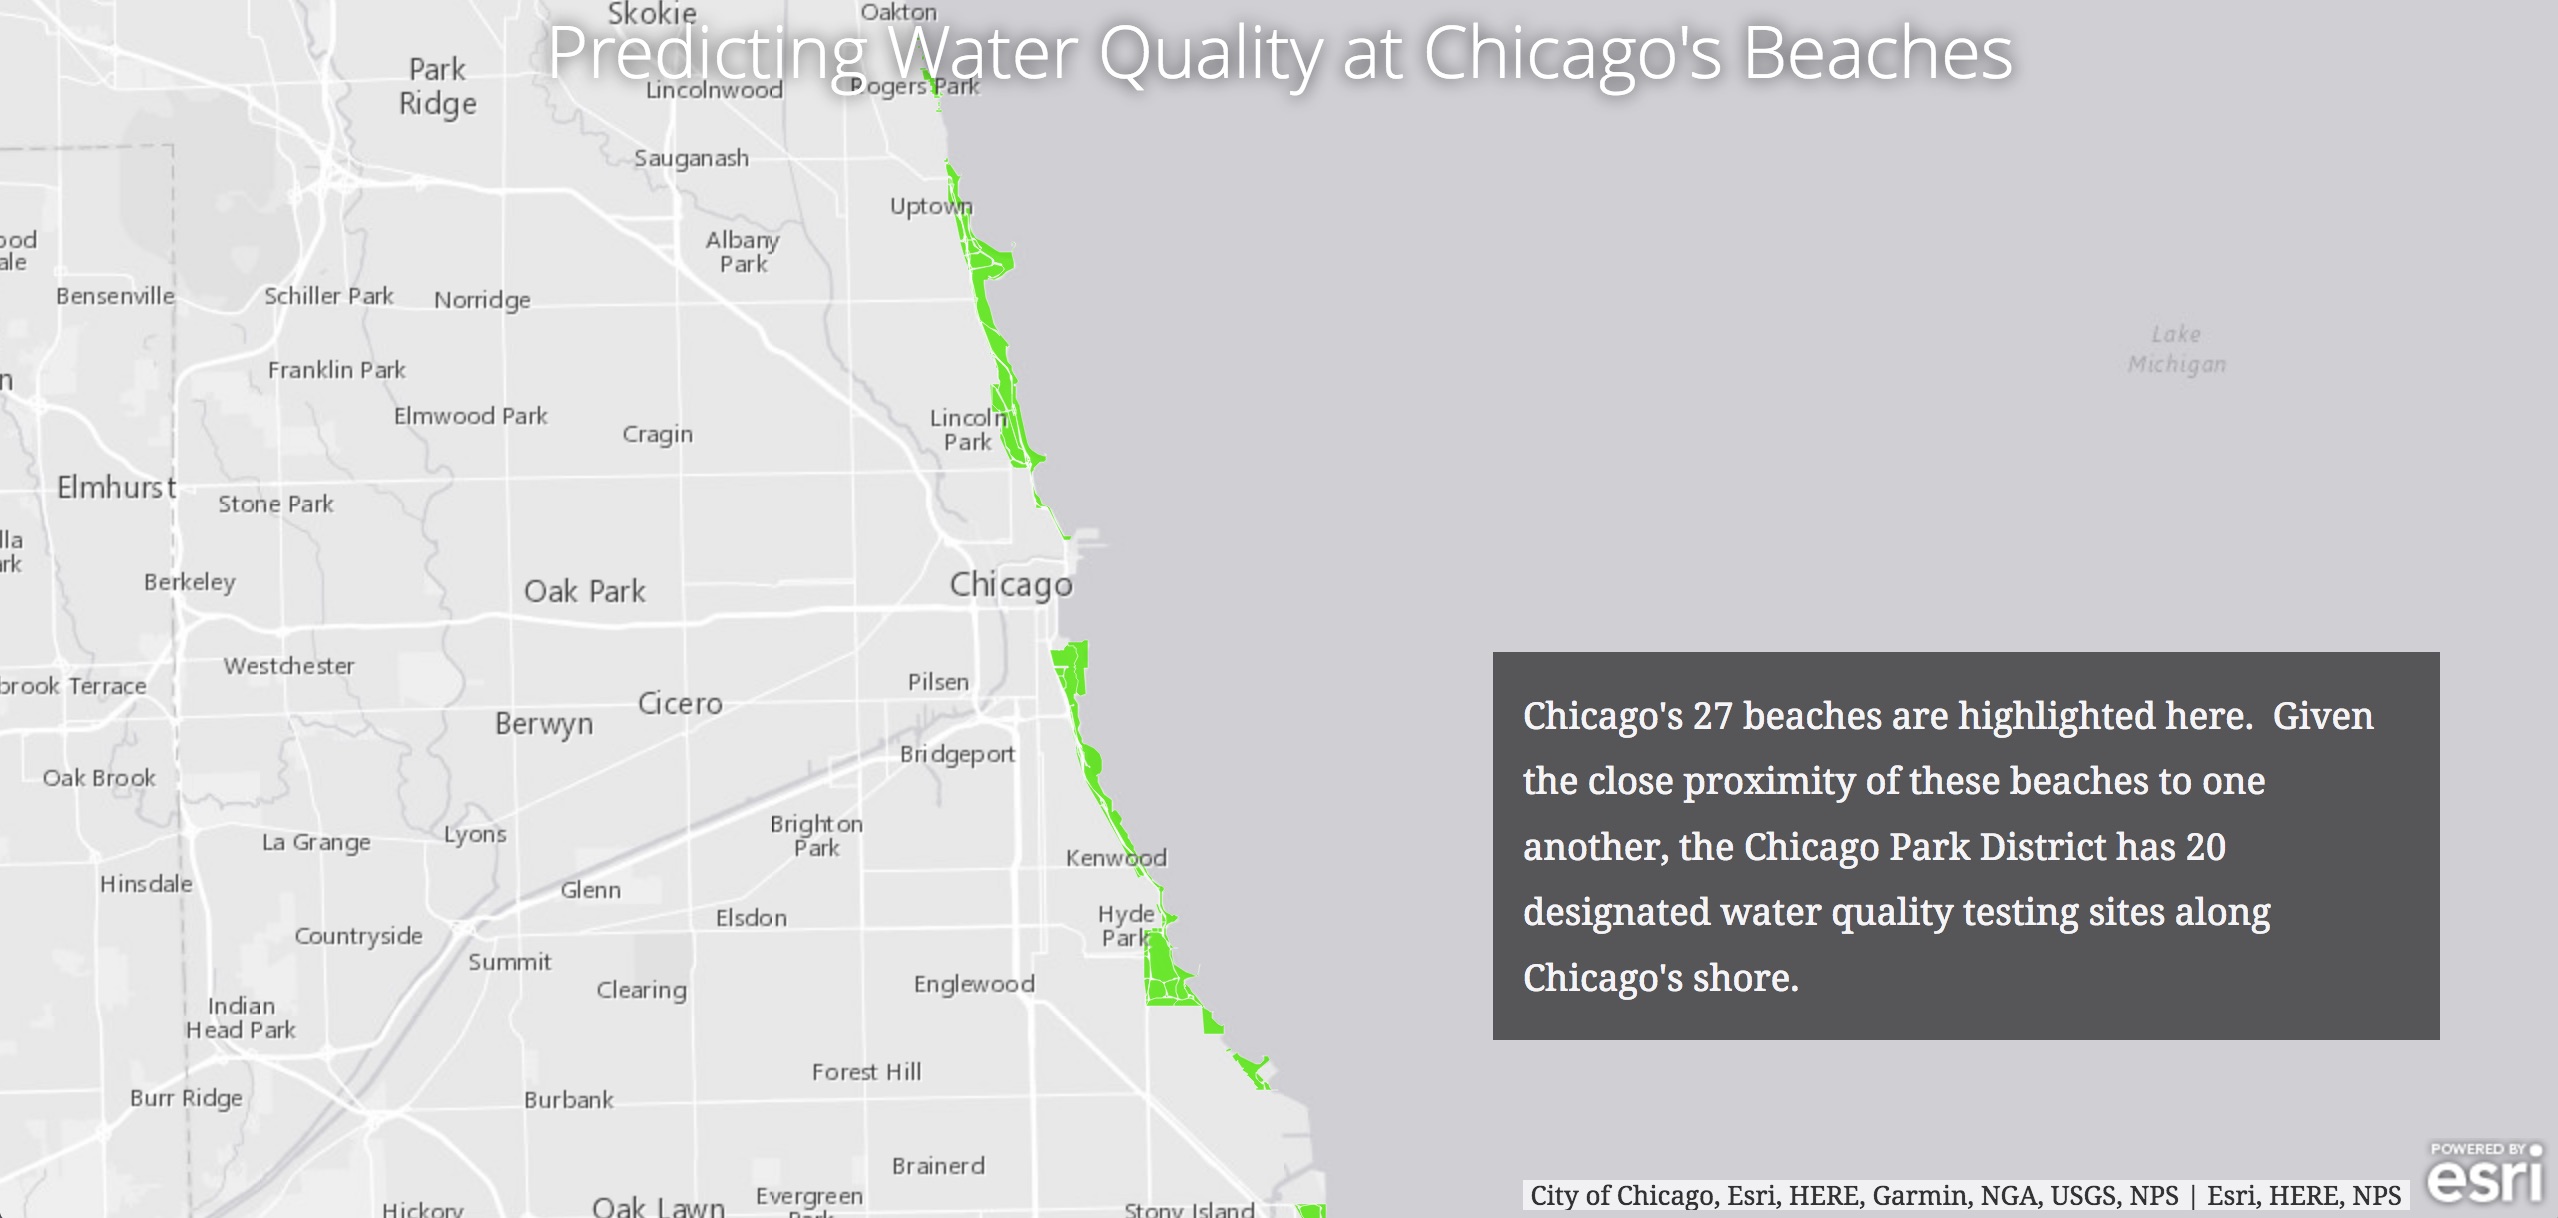 Predicting Water Quality at Chicago's Beaches